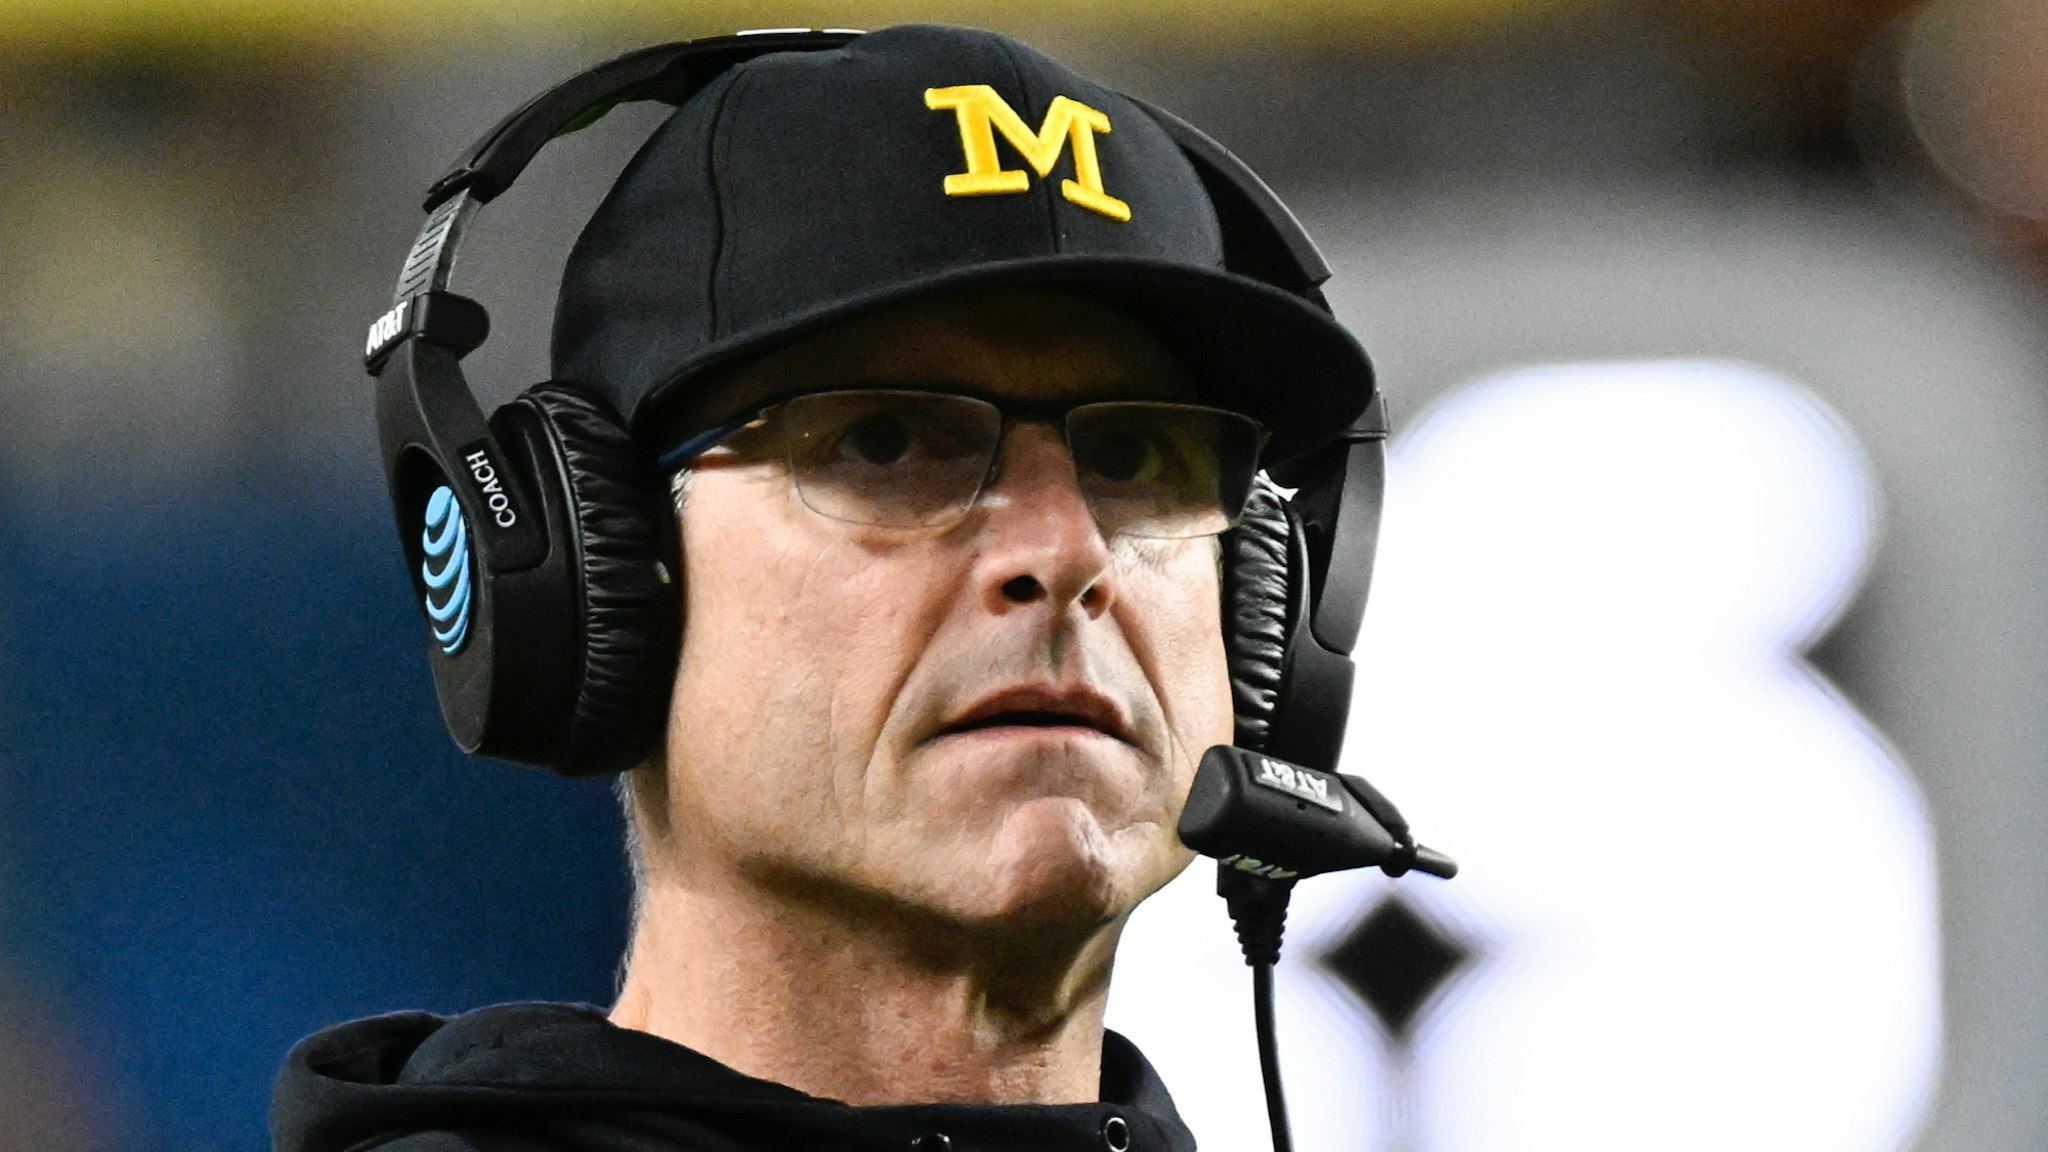 Michigan Wolverines head coach Jim Harbaugh watches from the sidelines during the College Football Playoff Semifinal game between the Georgia Bulldogs and the Michigan Wolverines at the Capital One Orange Bowl on December 31, 2021 at the Hard Rock Stadium in Miami Gardens, FL.